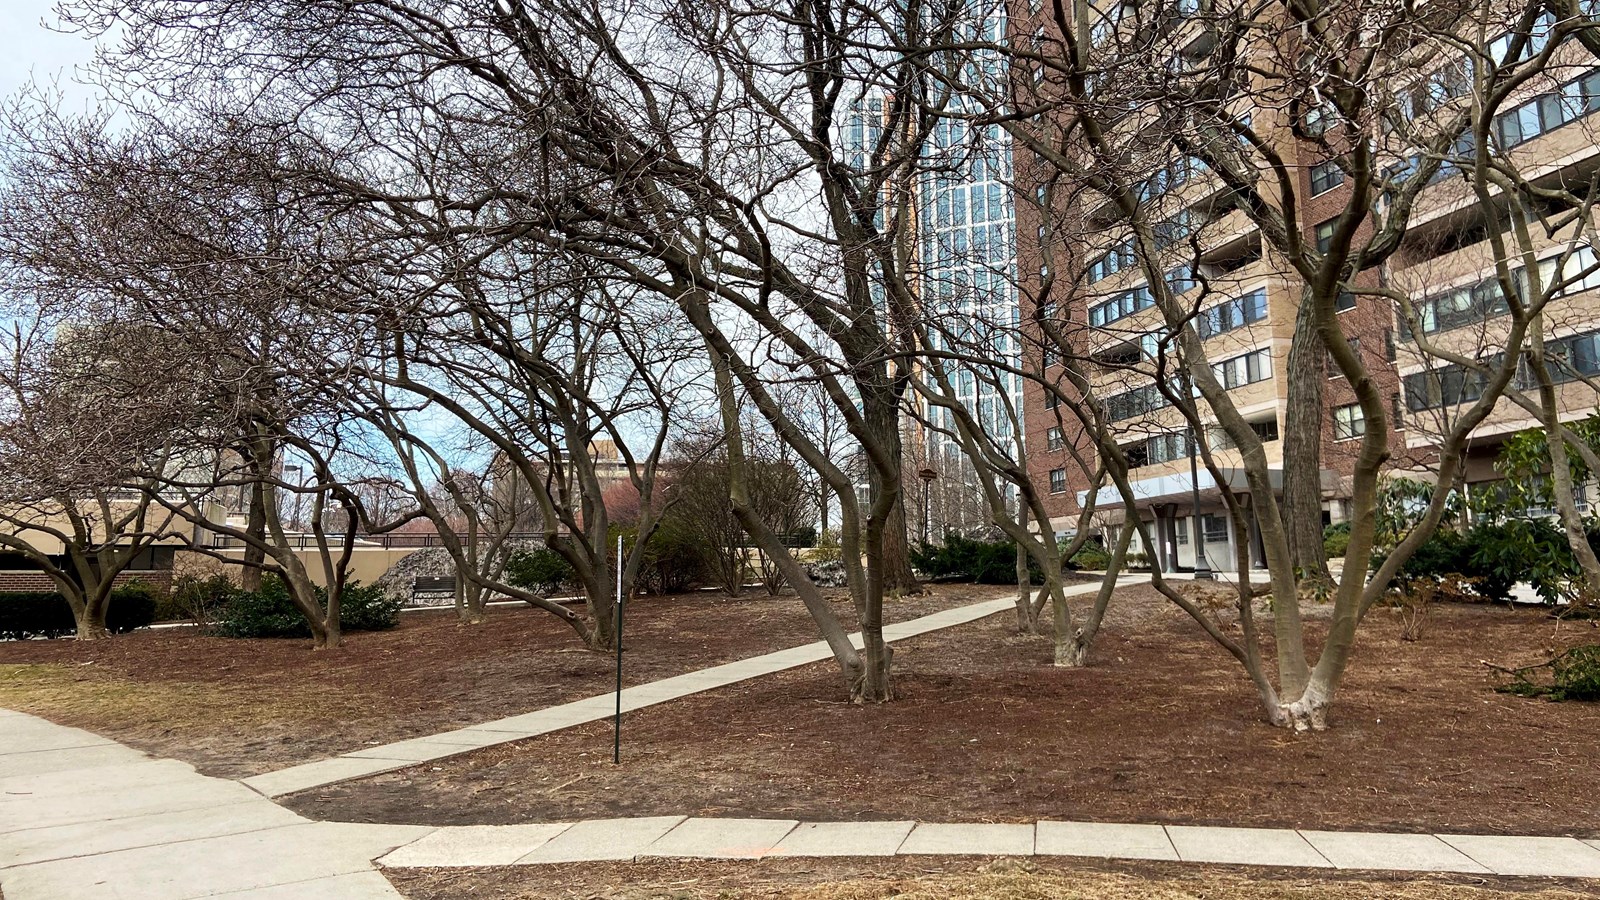 Winter image of a small park next to a side walk with bare trees among dirt and dead grass.